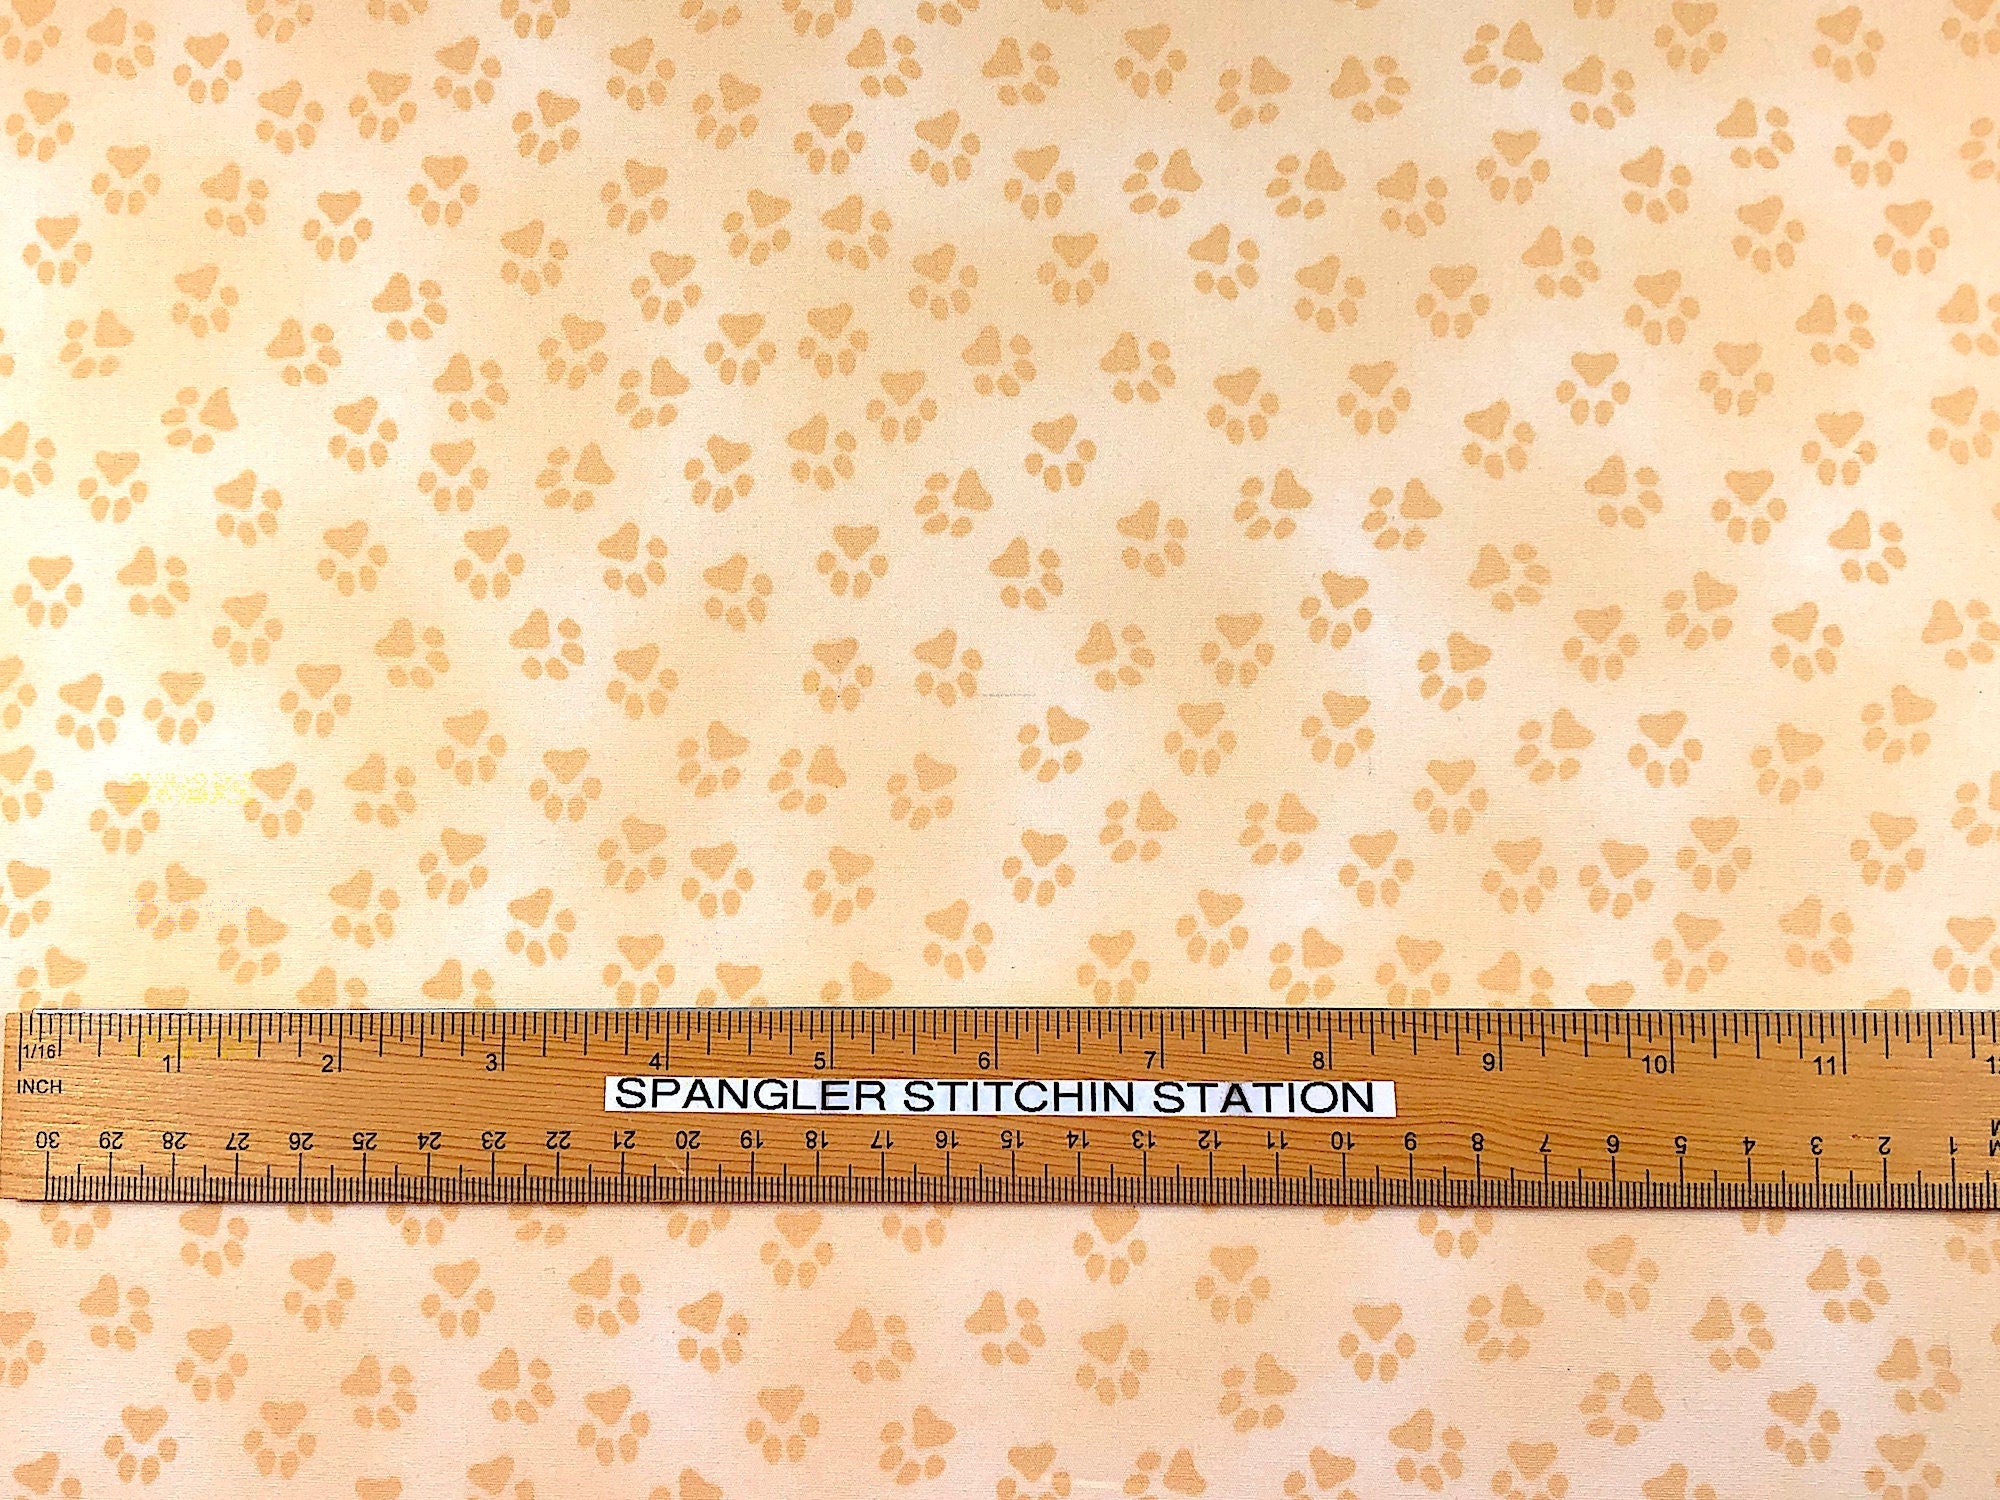 Paw Print Fabric - Cat Fabric - Cotton Fabric - Quilting Fabric - Exclusively Quilters - CAT-63